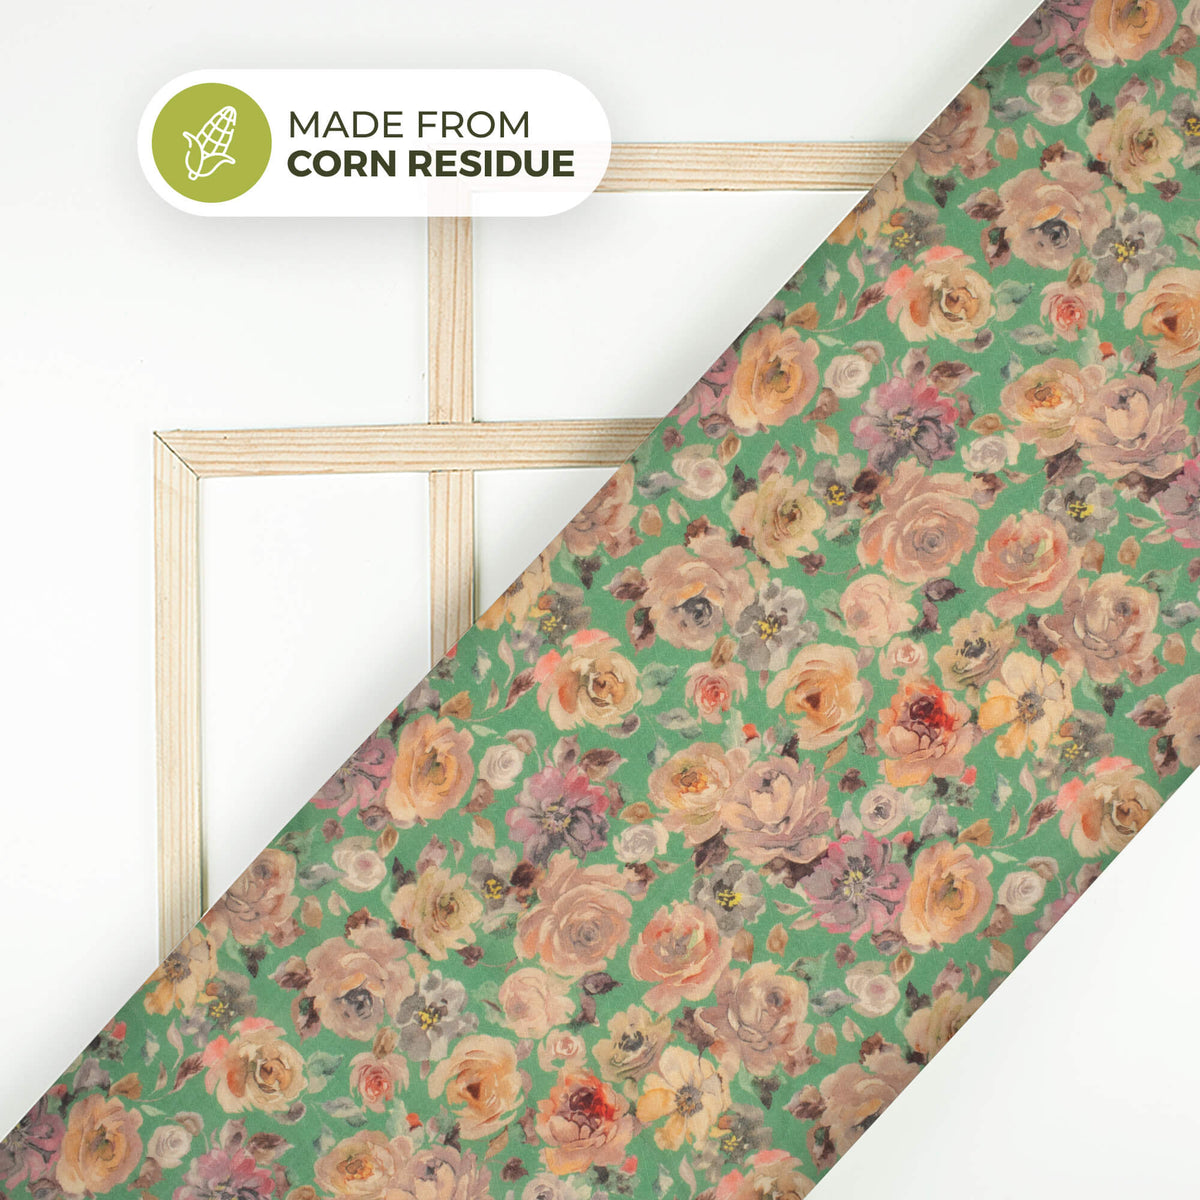 Lovely Floral Printed Sustainable Corn Fabric